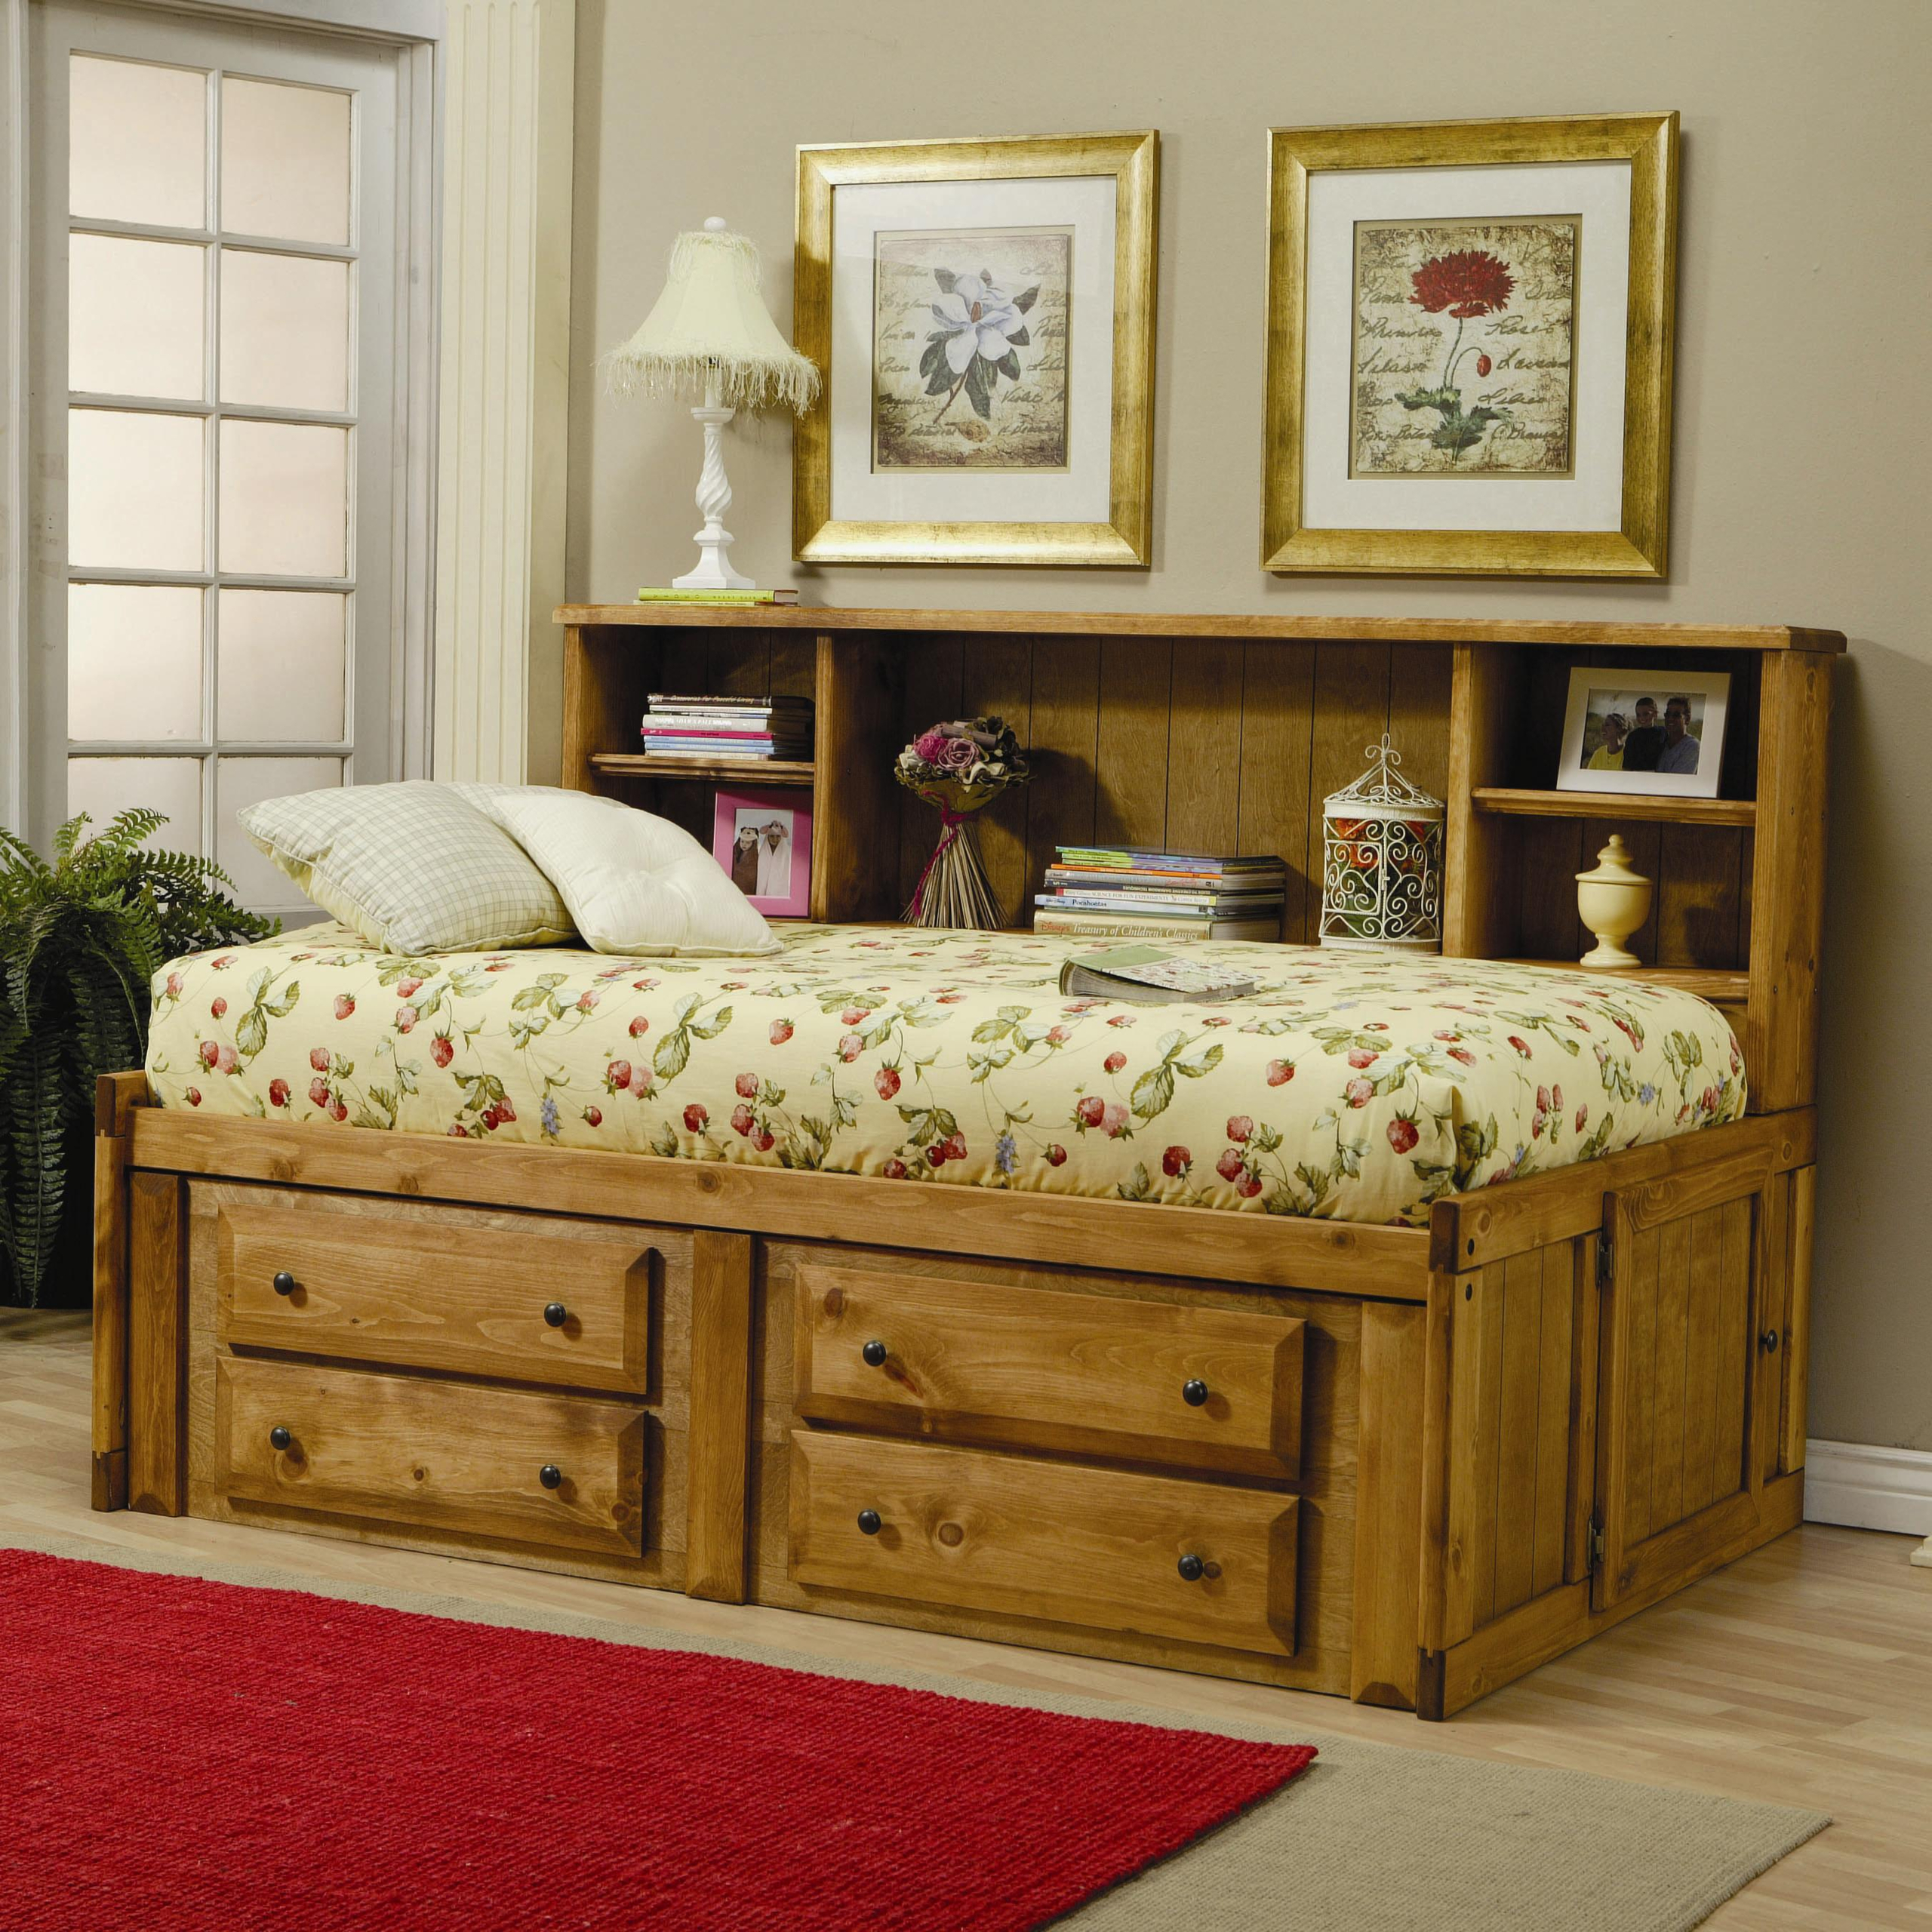 Bed With Drawers Underneath Visualhunt, Pine Twin Bed With Storage Under